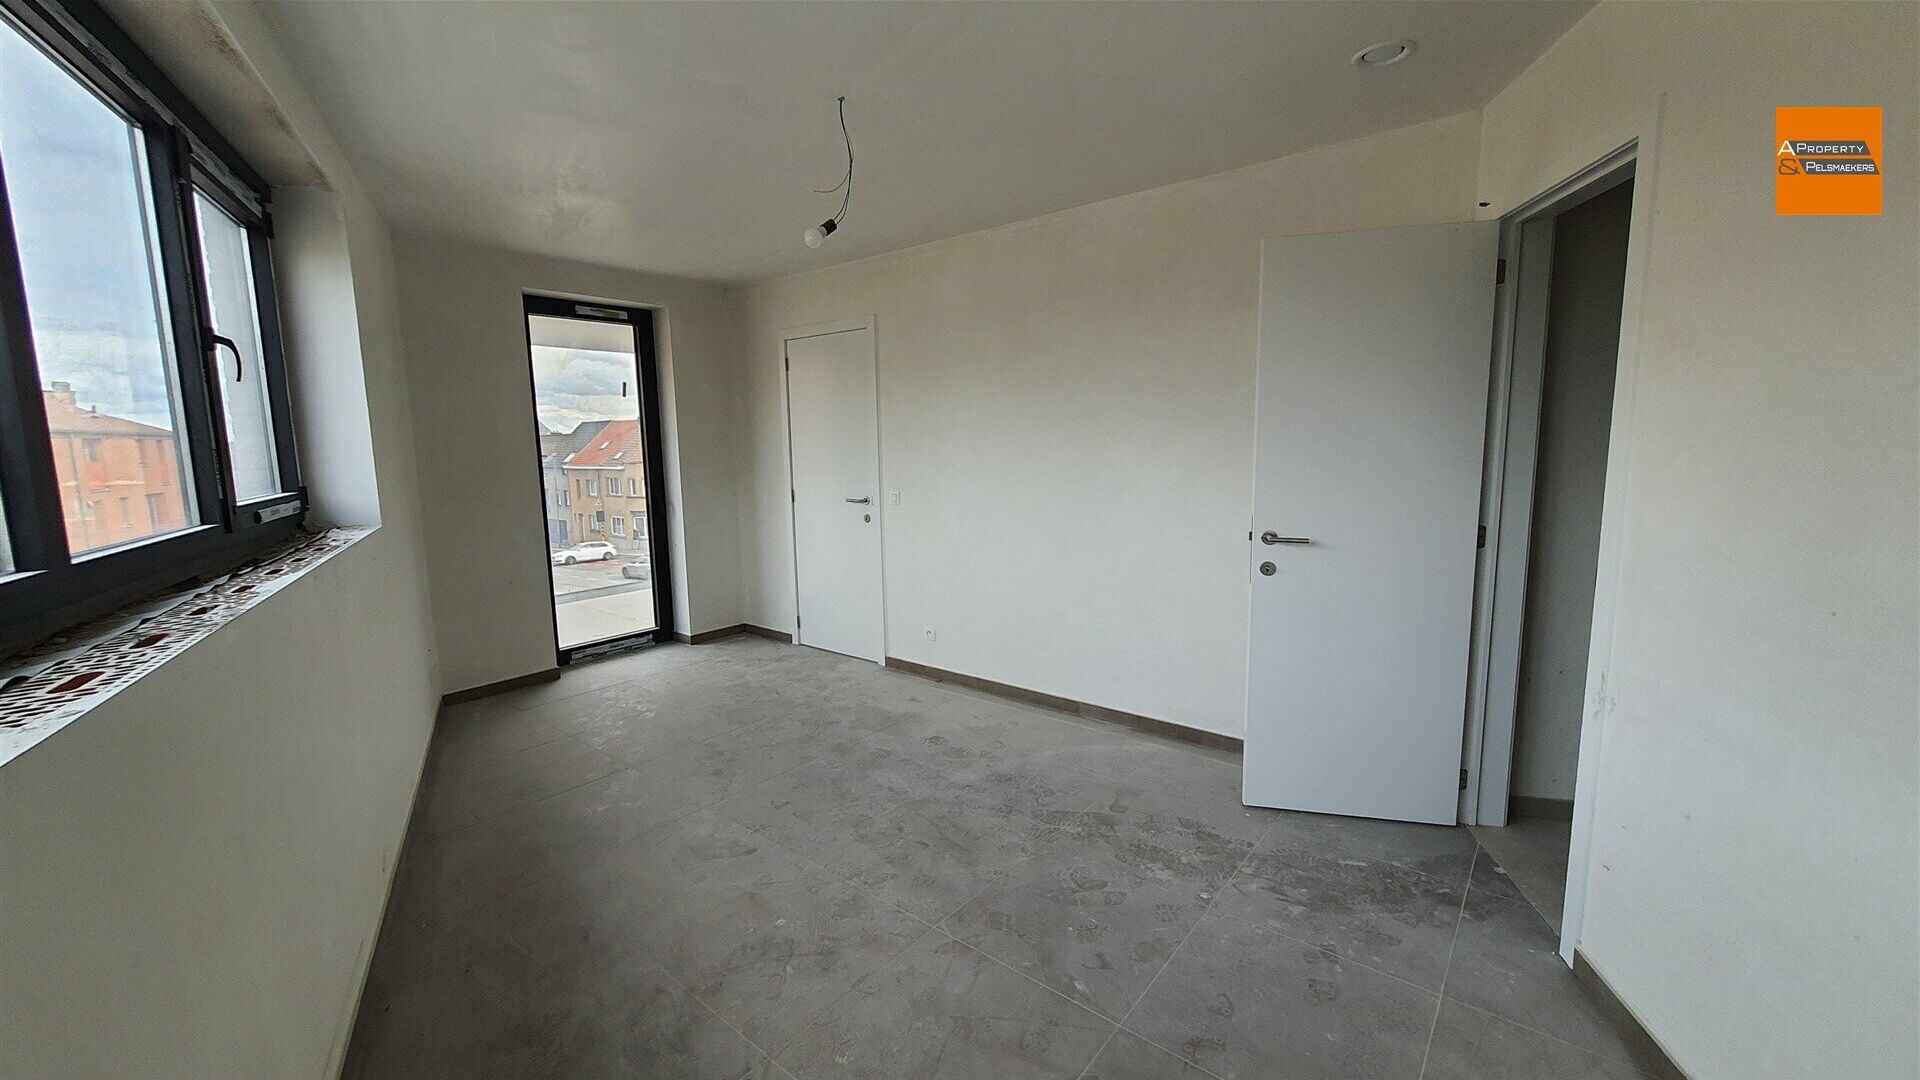 Apartment building for sale in SINT-STEVENS-WOLUWE